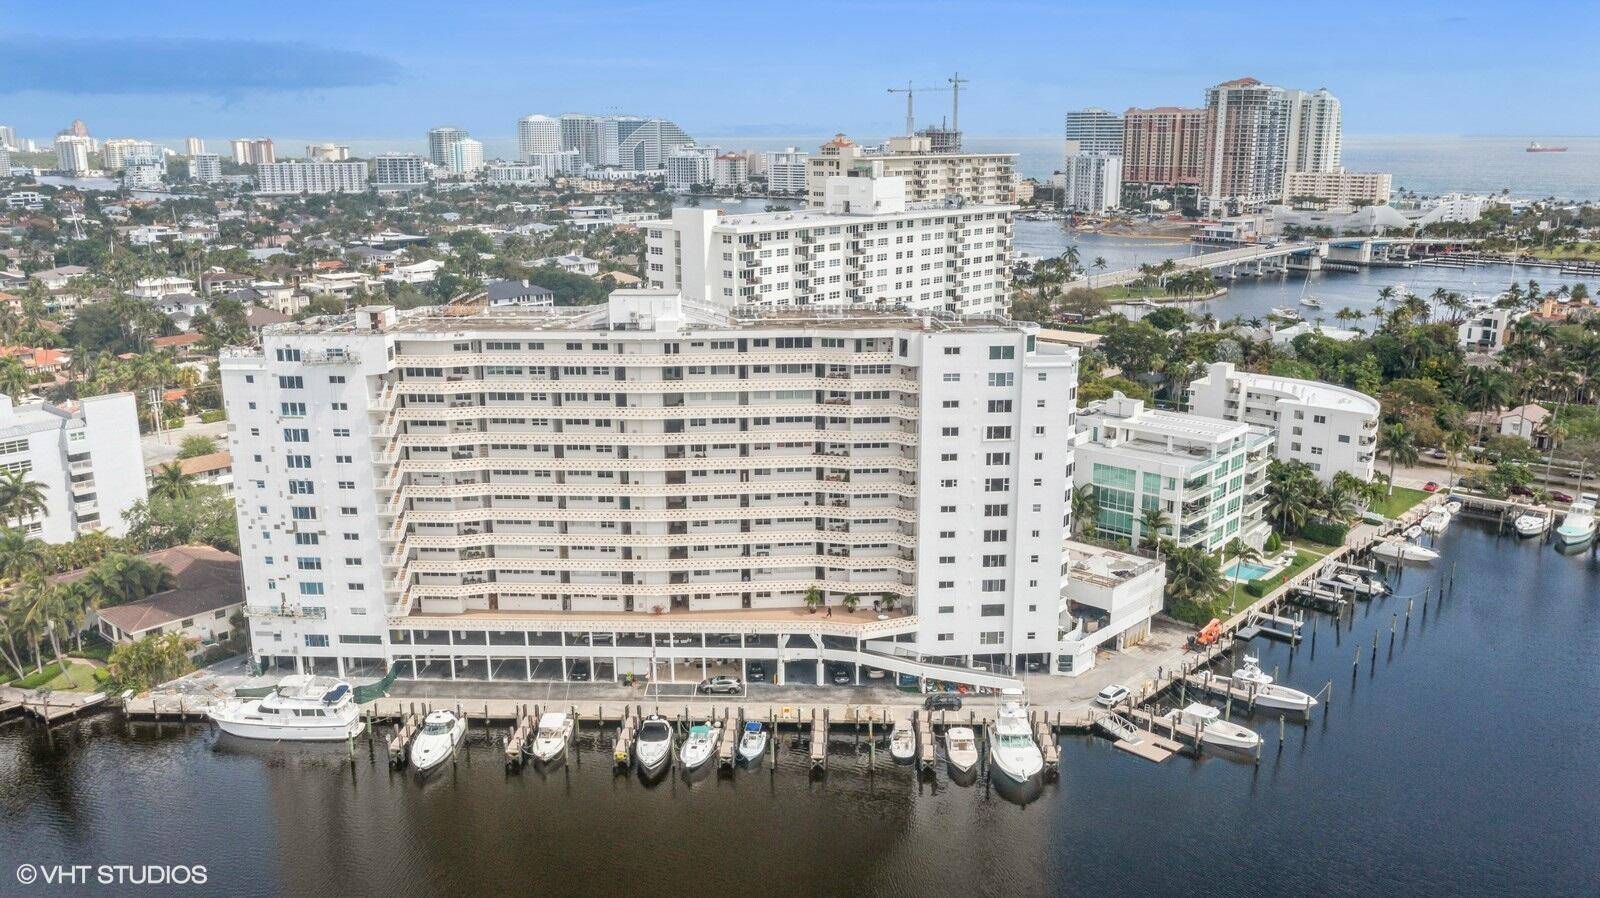 3 bedroom 2. 5 bath fully renovated home in Las Olas Isles with views on Sunset Lake in Historic Four Seasons building.